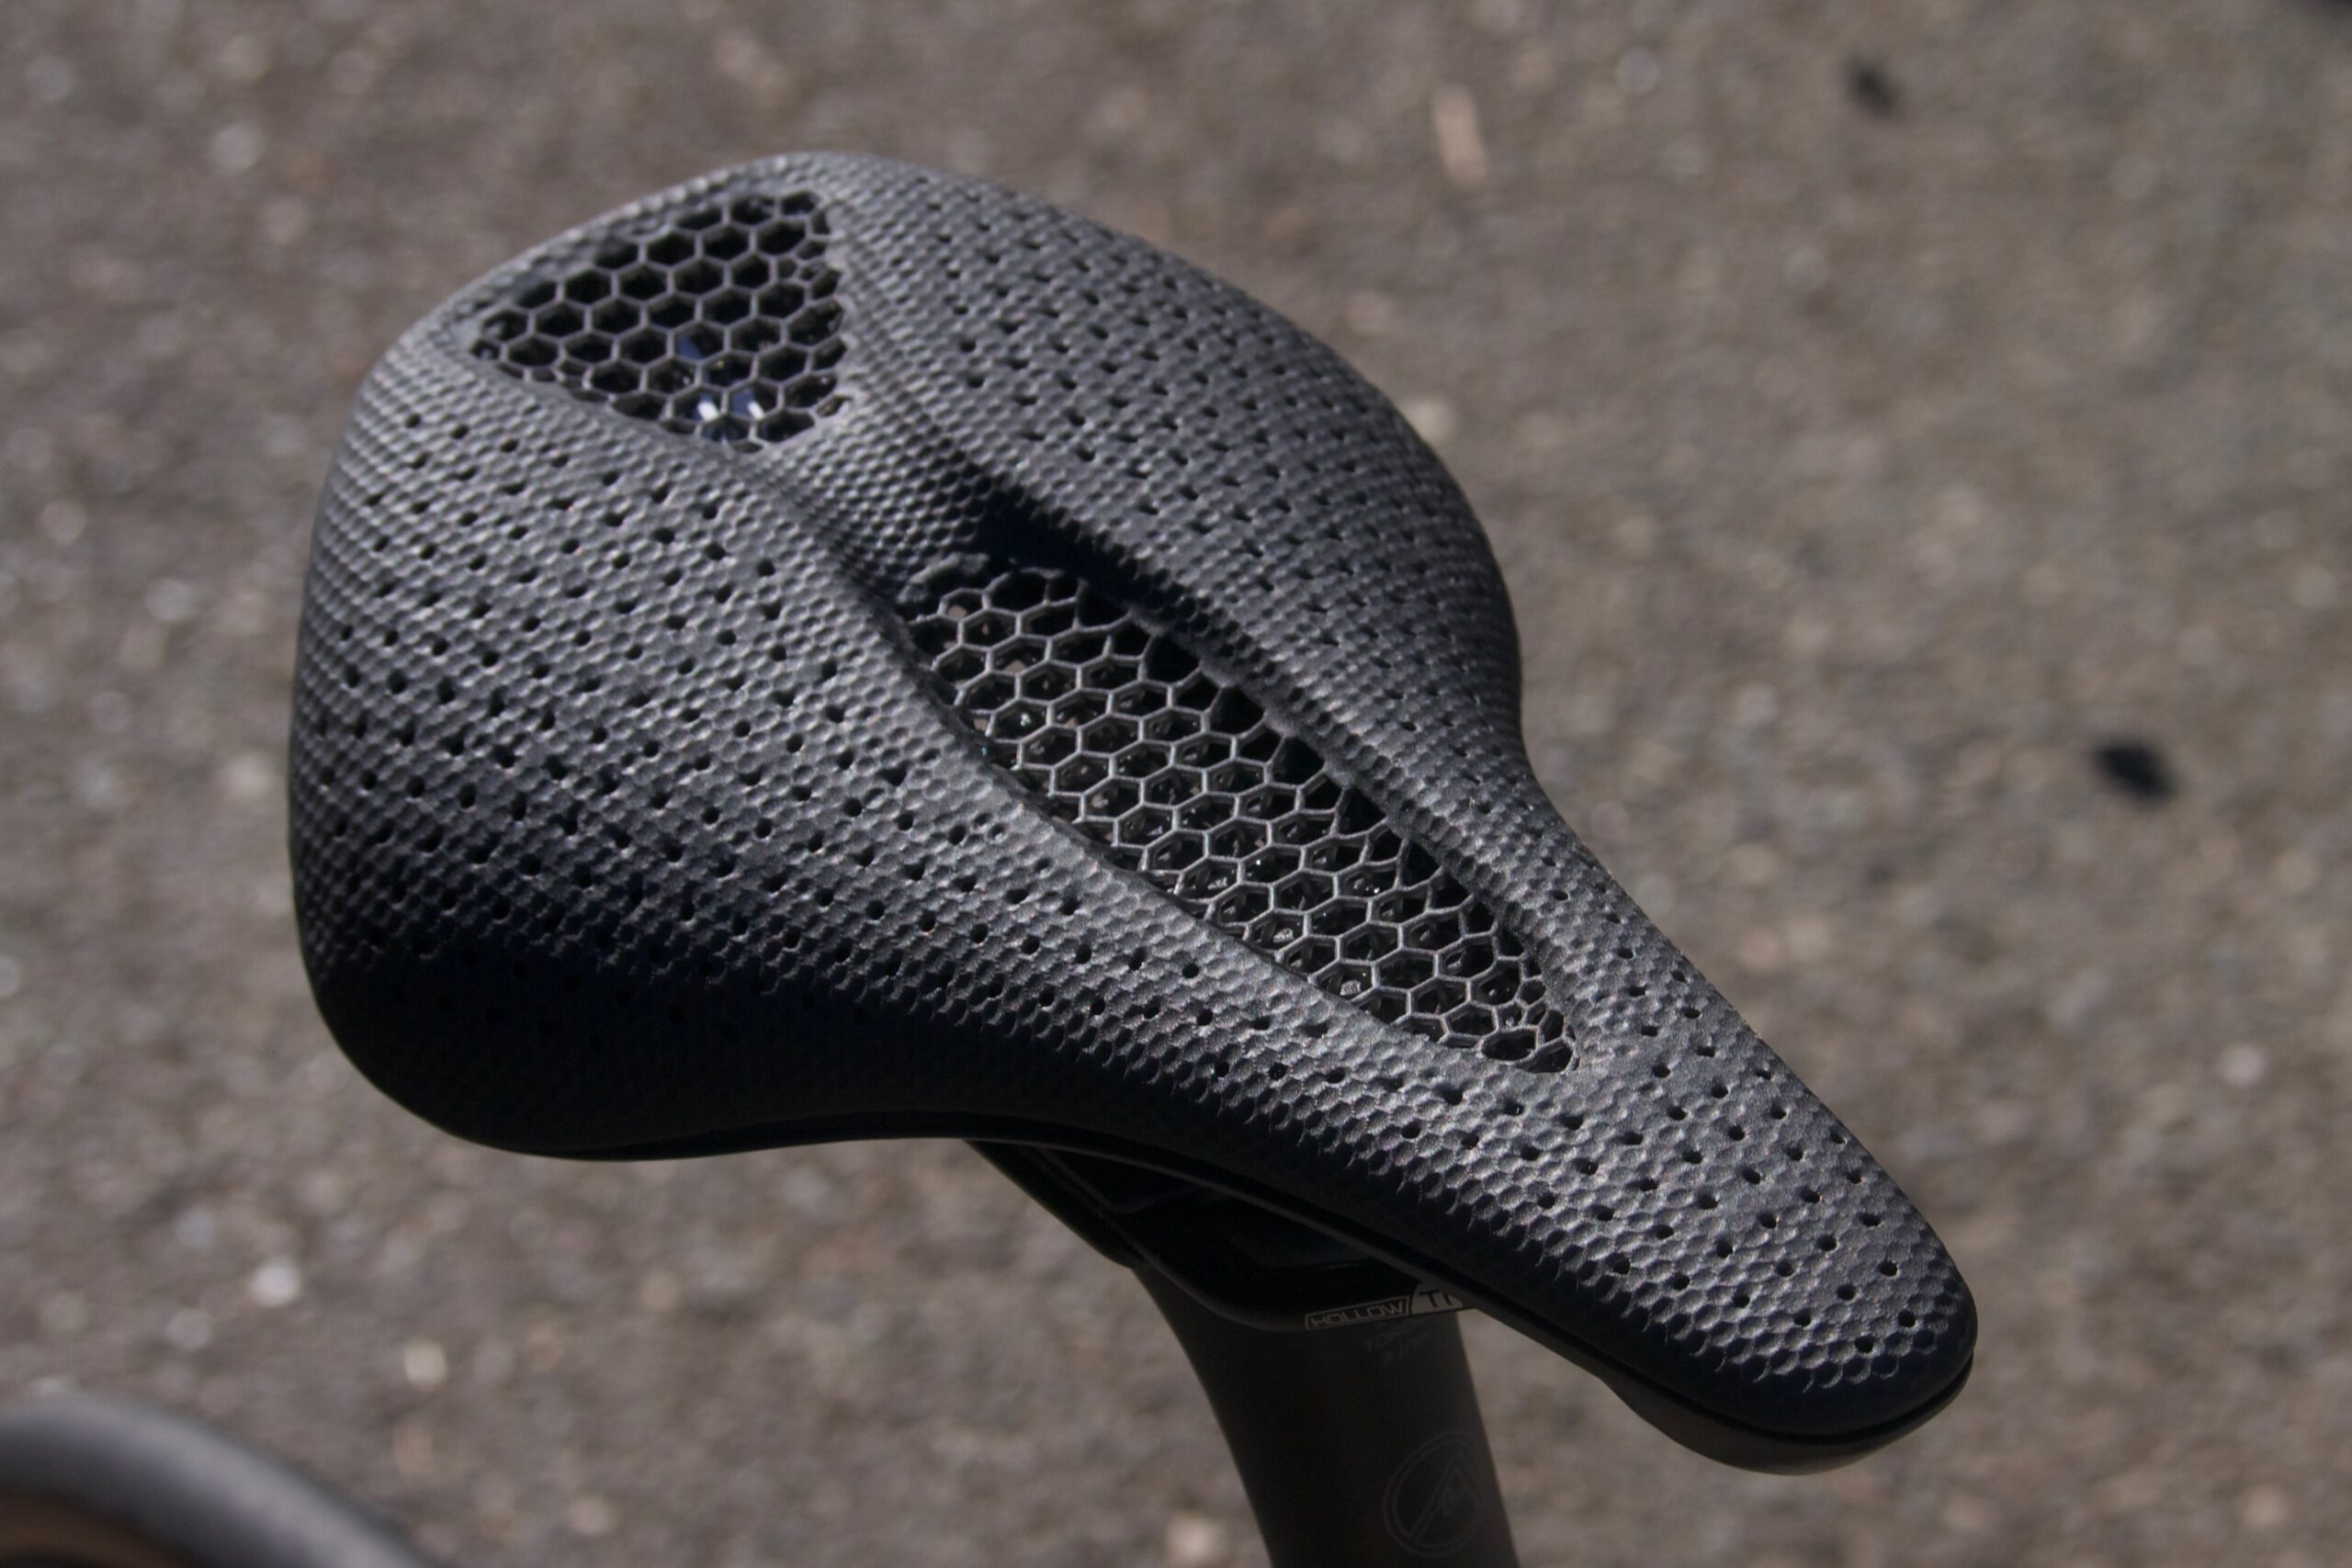 The 3D-printed Specialized Power Pro with Mirror road bike saddle